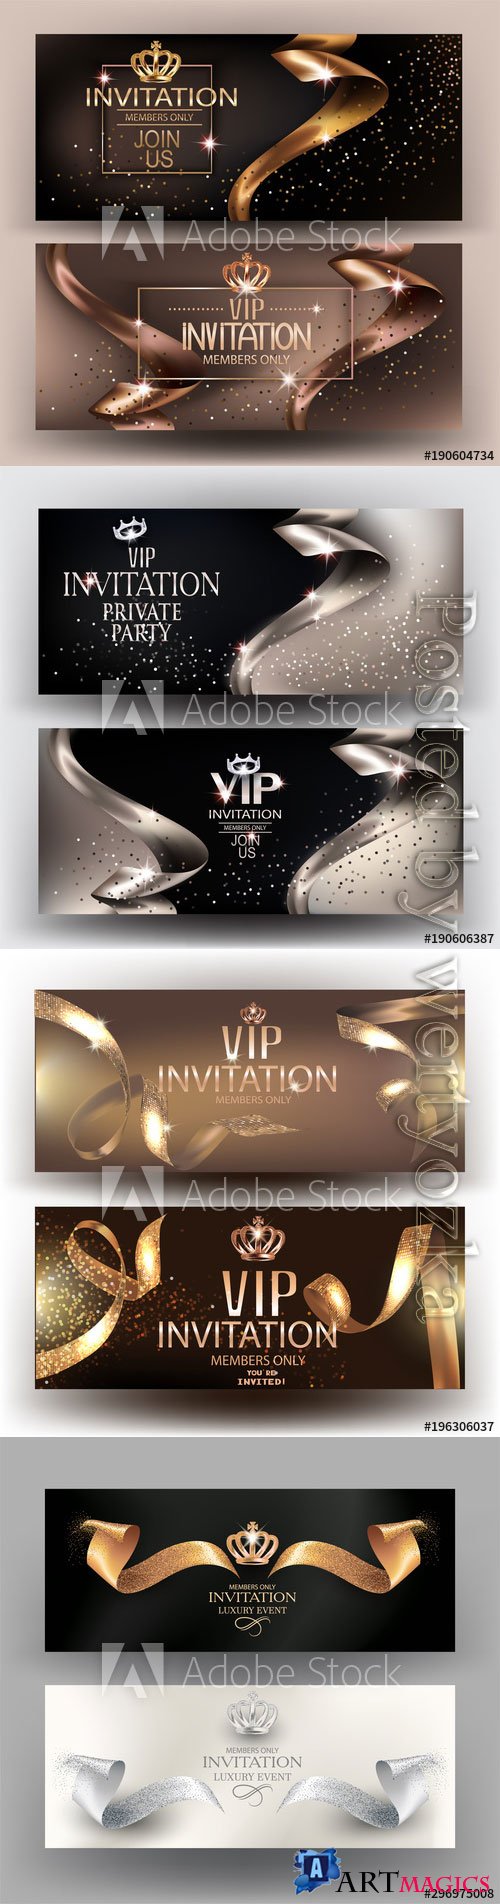 Vip elegant vector invitation cards with gold beautiful ribbons and vintage elements